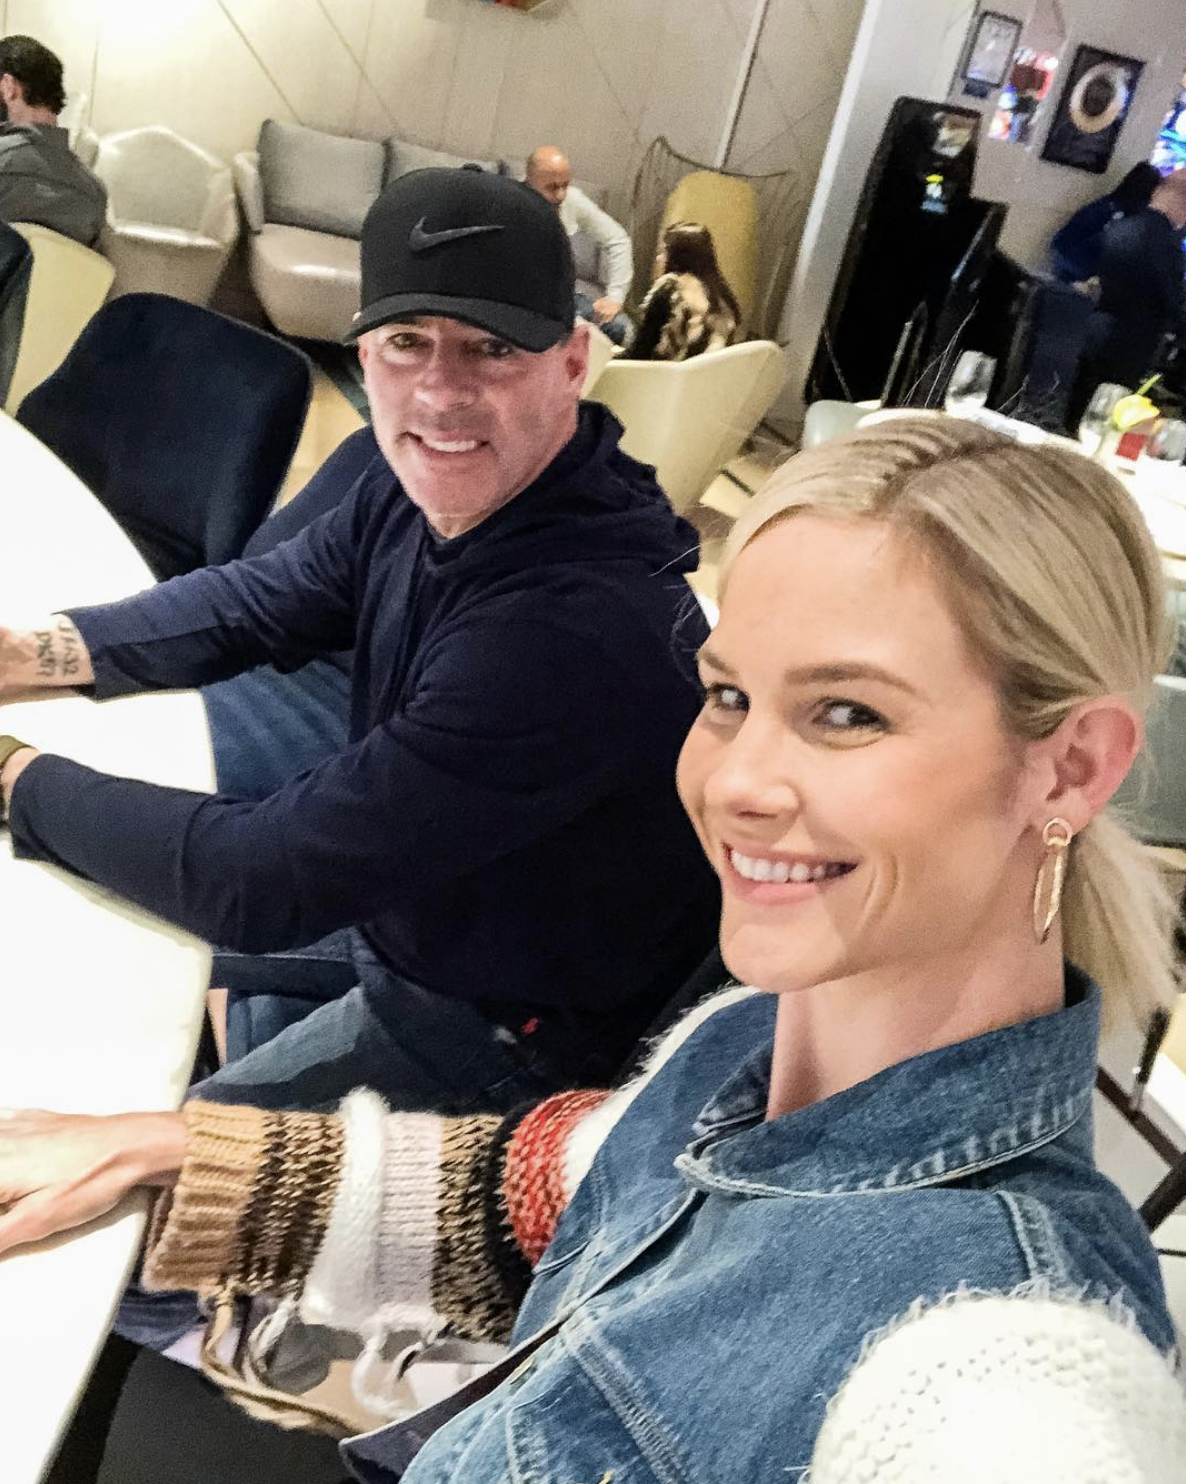 <p>In October 2019, Jim Edmonds filed to divorce "The Real Housewives of Orange County" alum Meghan King Edmonds after five years of marriage. Their split came in the wake of two different cheating scandals. First, the former professional baseball player <a href="https://www.wonderwall.com/news/housewives-alum-meghan-king-edmonds-i-dont-trust-husband-anymore-3020021.article">made headlines</a> in July 2019 when a website published intimate text conversations he had with a woman known as the "Baseball Madame." He admitted to Us Weekly that he "had a lapse in judgment" and had an "inappropriate conversation" with the woman -- but insisted there was never a physical relationship, which is also what he told his wife. Meghan took to her blog to share what happened, writing in part that she'd called her husband "and he confessed to me that he had exchanged lewd photos with this woman over the course of several months and a physical relationship never existed. He paid her off to protect me so I'd never find out." But the info still came to light, and Meghan's trust was destroyed. Though they tried to work on their marriage in the months that followed, the damage had been done. Days before Jim's divorce filing, <a href="https://www.wonderwall.com/celebrity/couples/ben-affleck-girlfriend-raya-dating-app-celeb-love-life-news-late-october-2019-hollywood-romance-report-3021466.gallery?photoId=1066280">Meghan accused him of having an affair</a> -- this time with one of their four nannies -- which he also denied.</p>